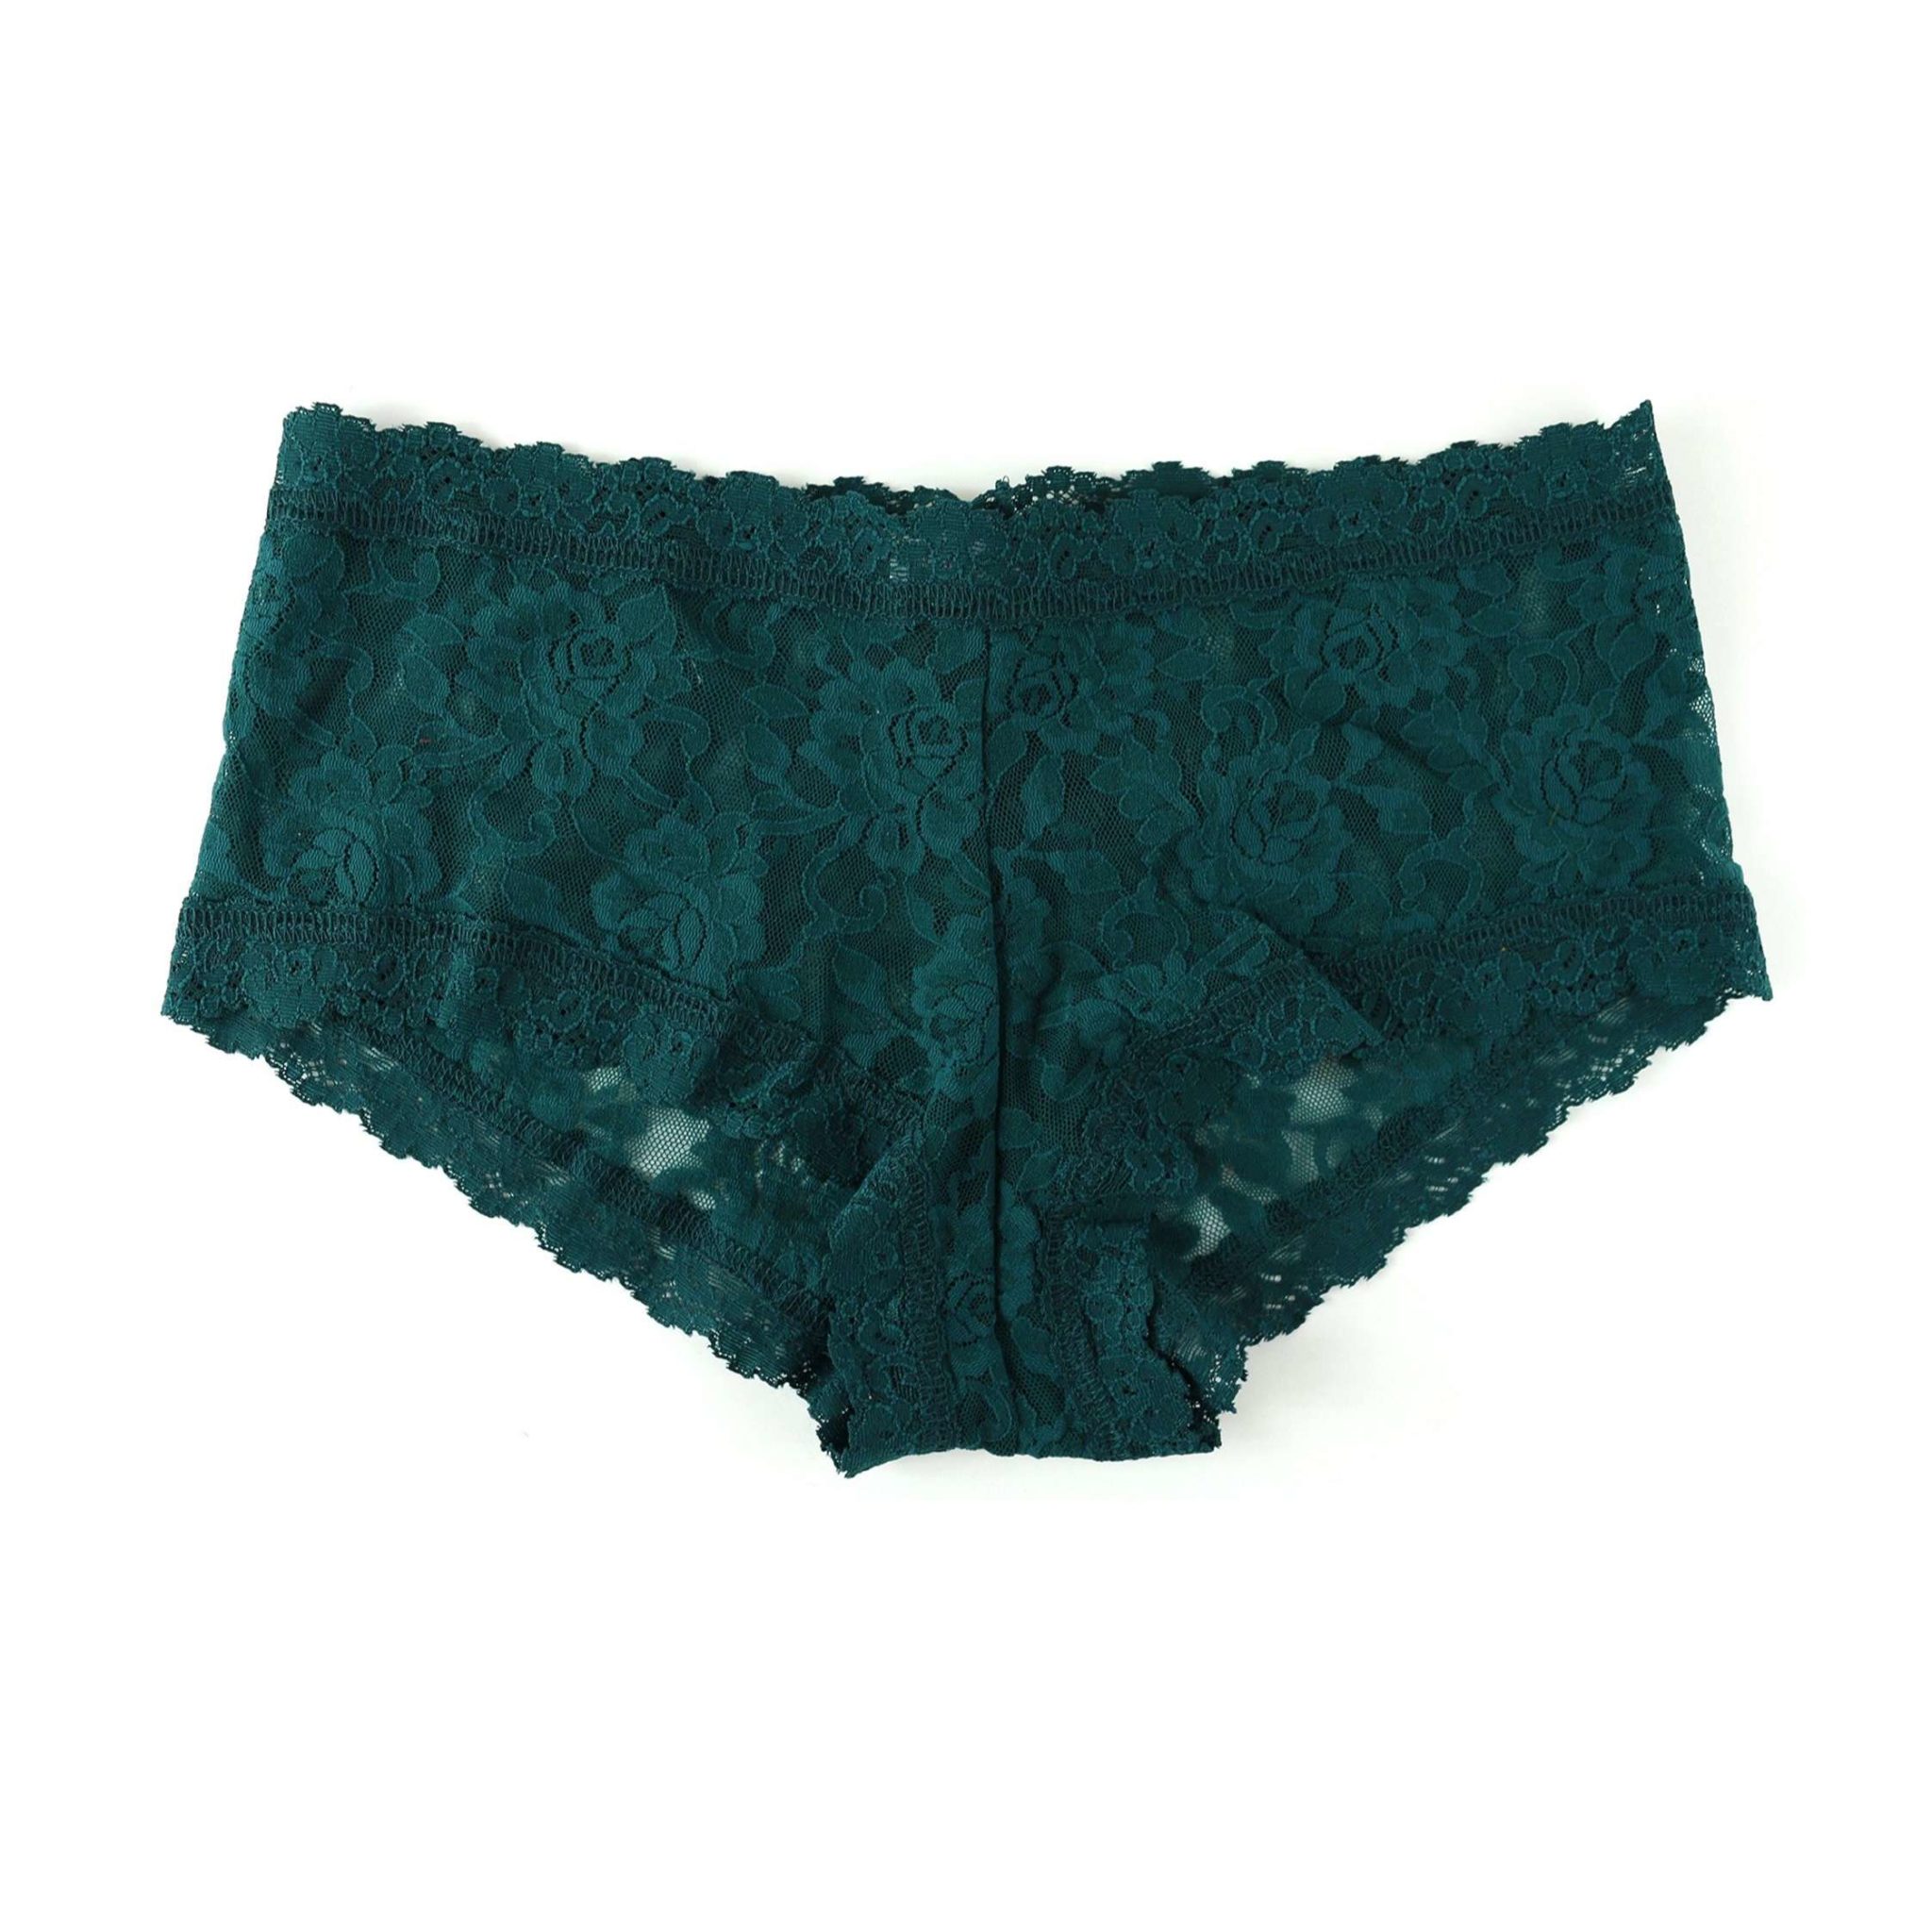 Hanky Panky Underwear Review - Must Read This Before Buying